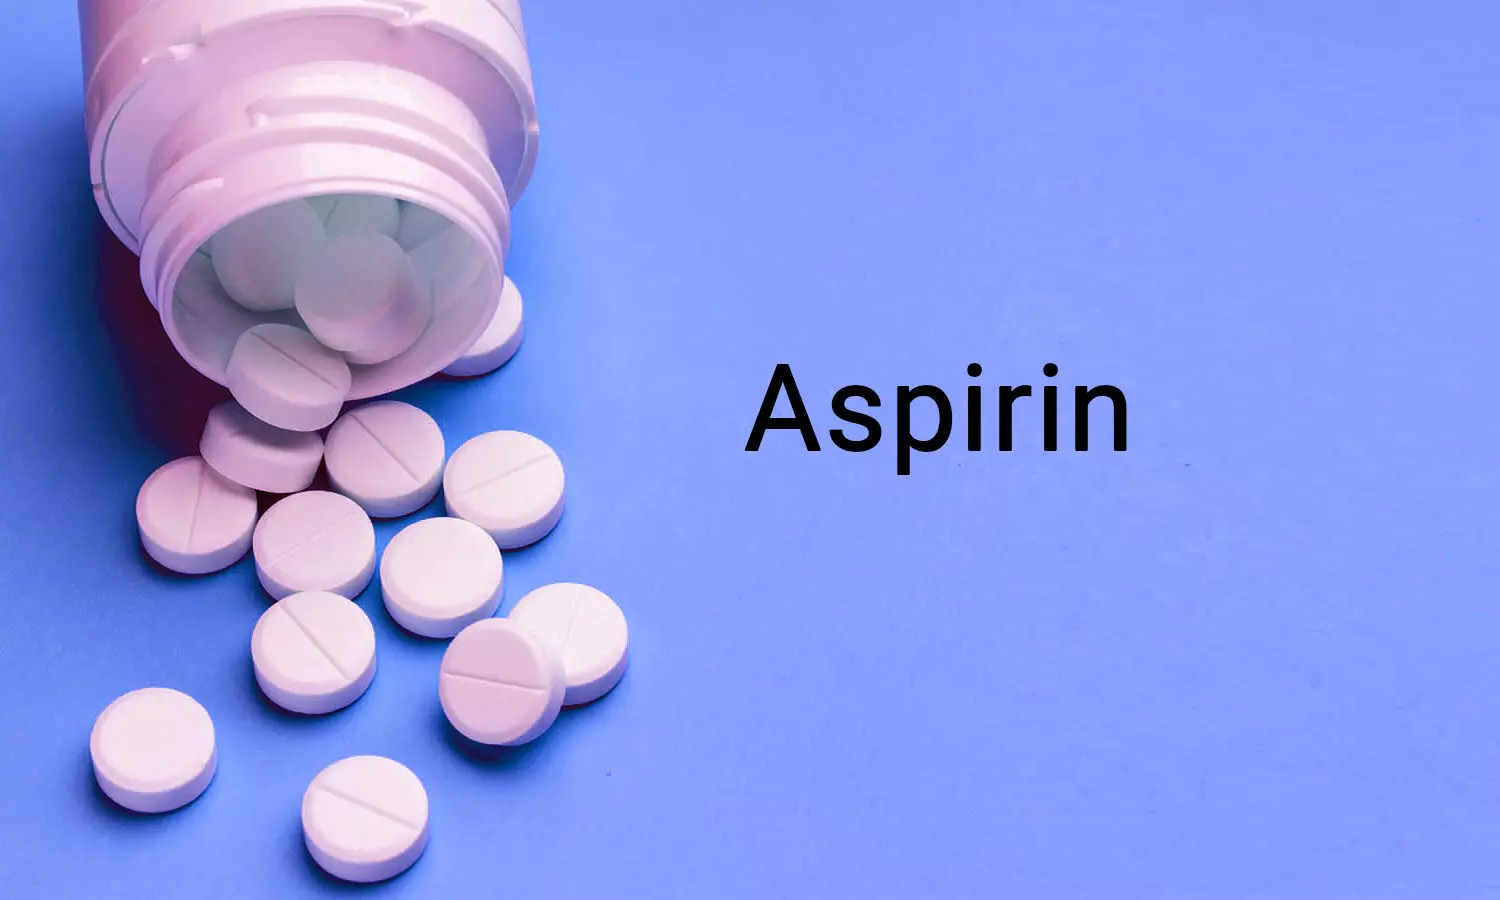 Low-Dose Aspirin improves Pregnancy Success After miscarriage, Suggests  Reanalysis